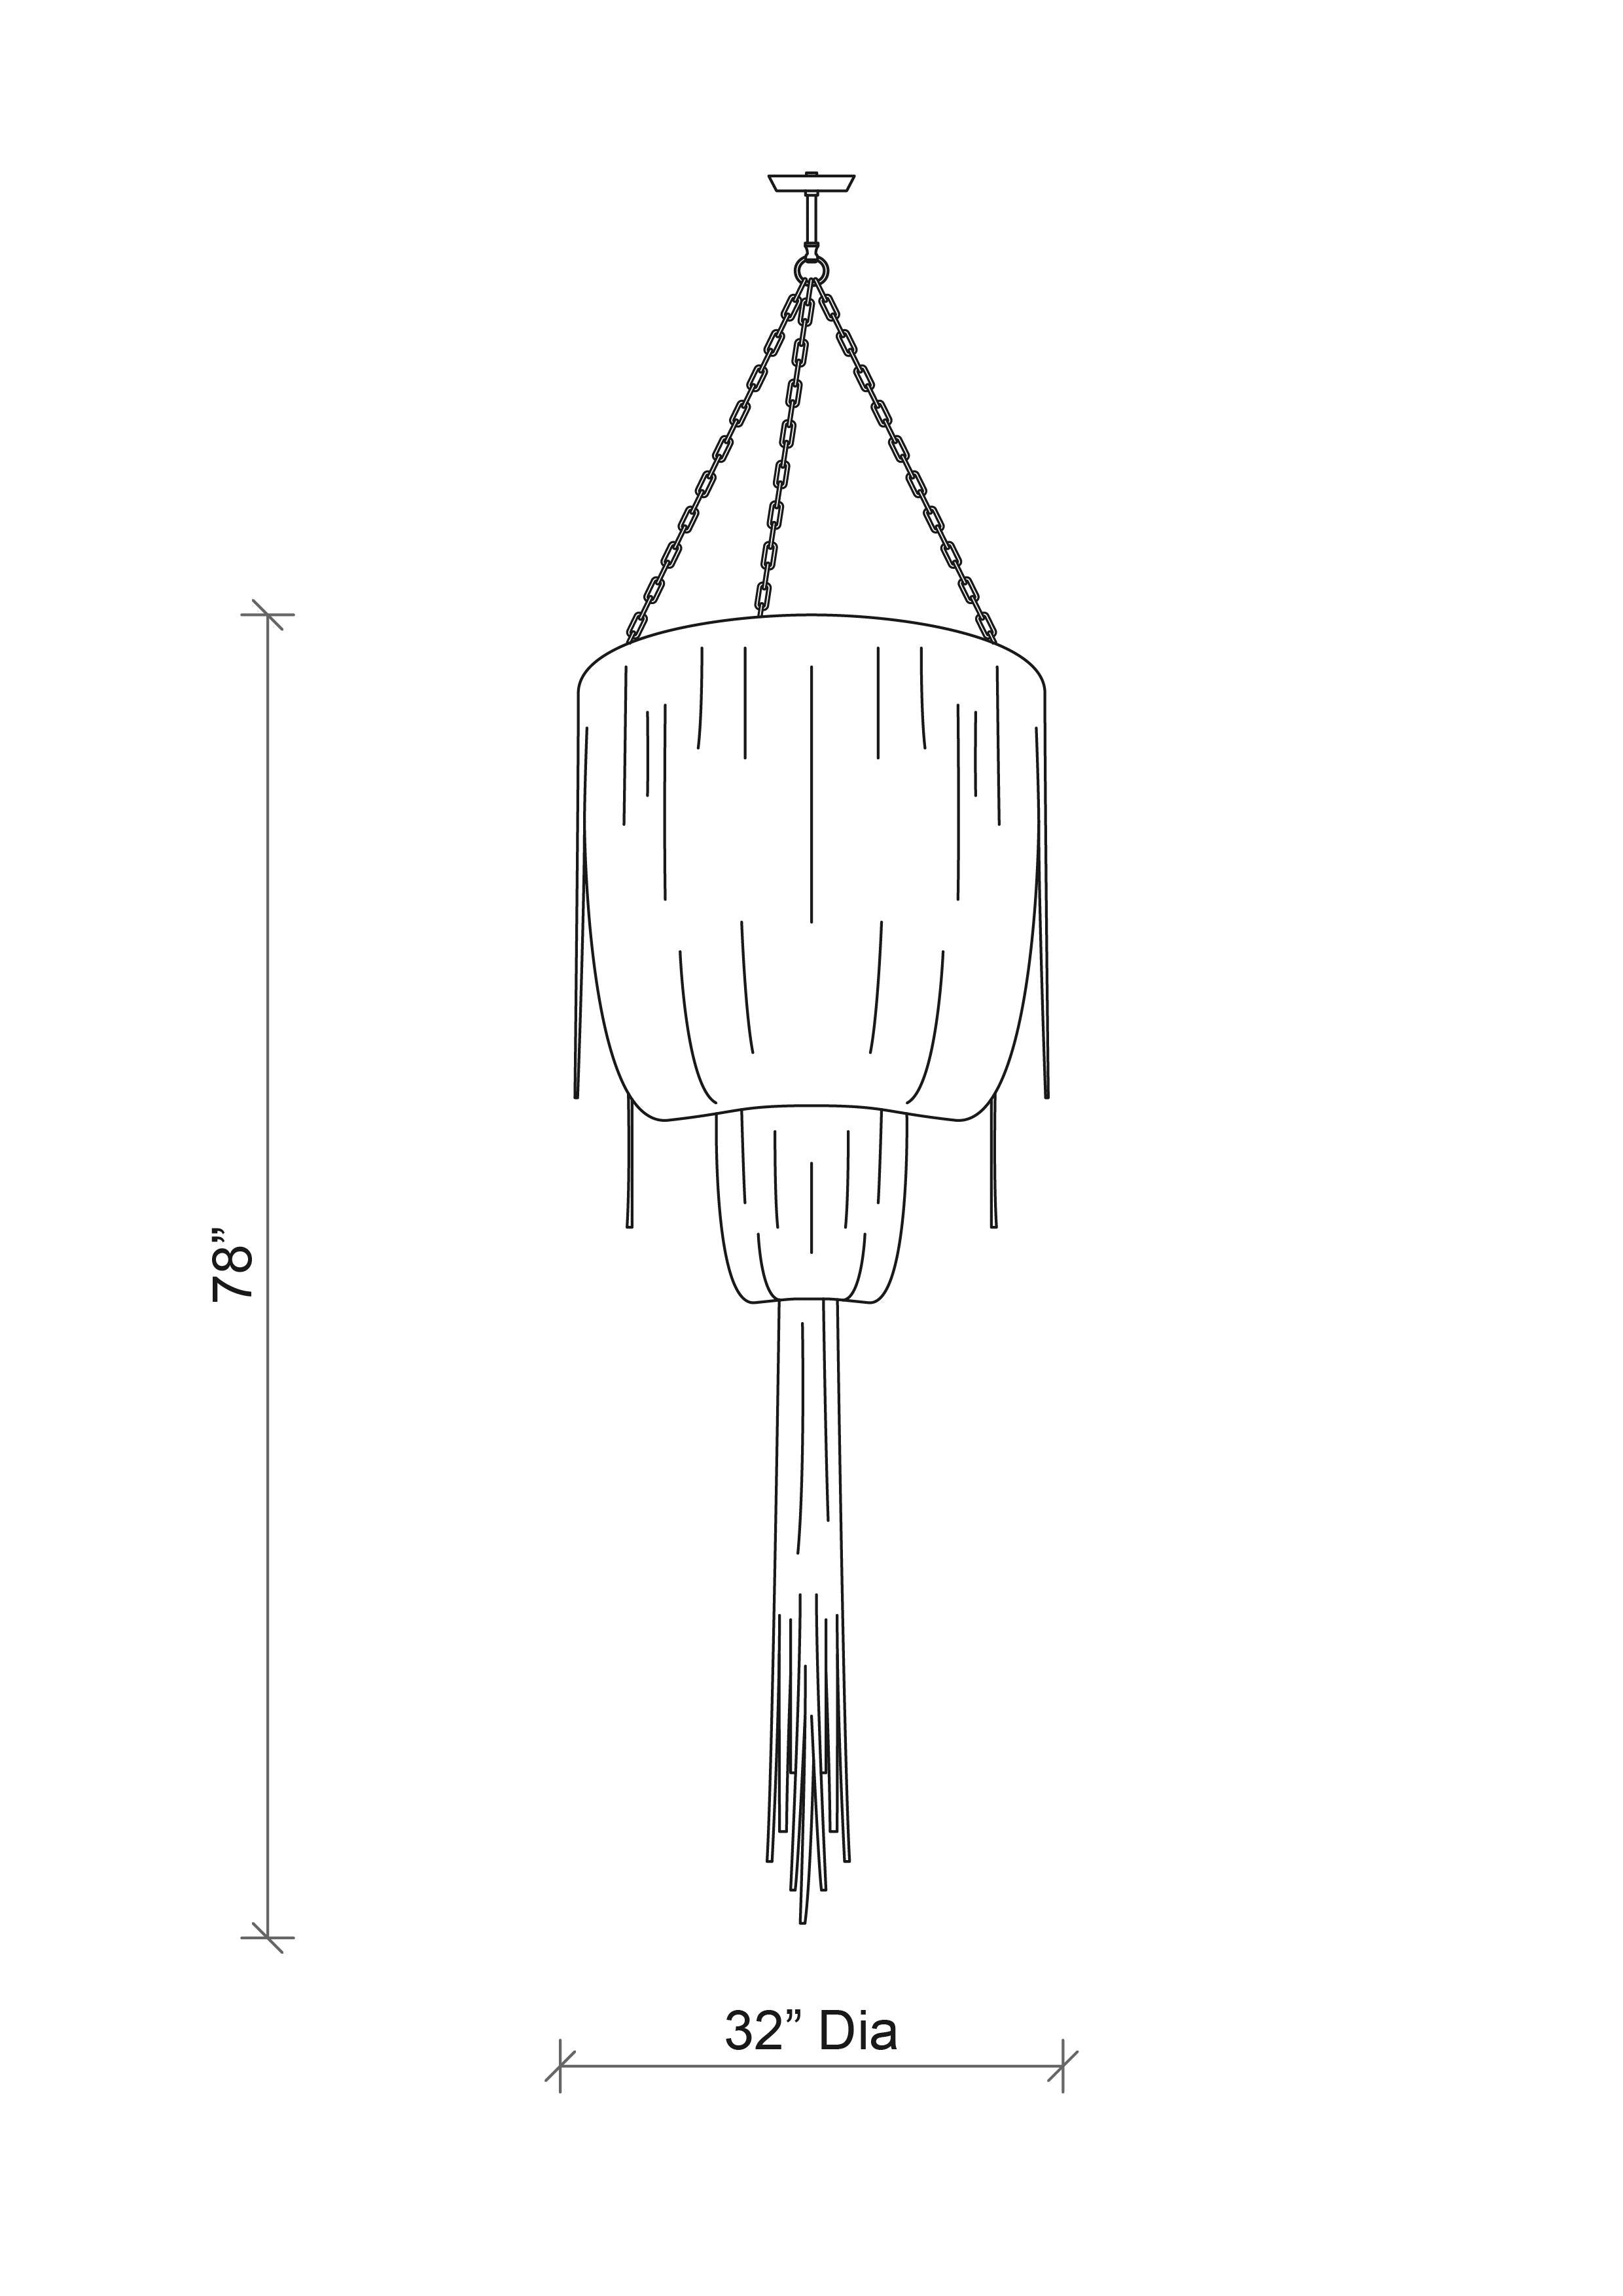 Medium Round Double-Ball Urchin Leather Chandelier in NeKeia Leather